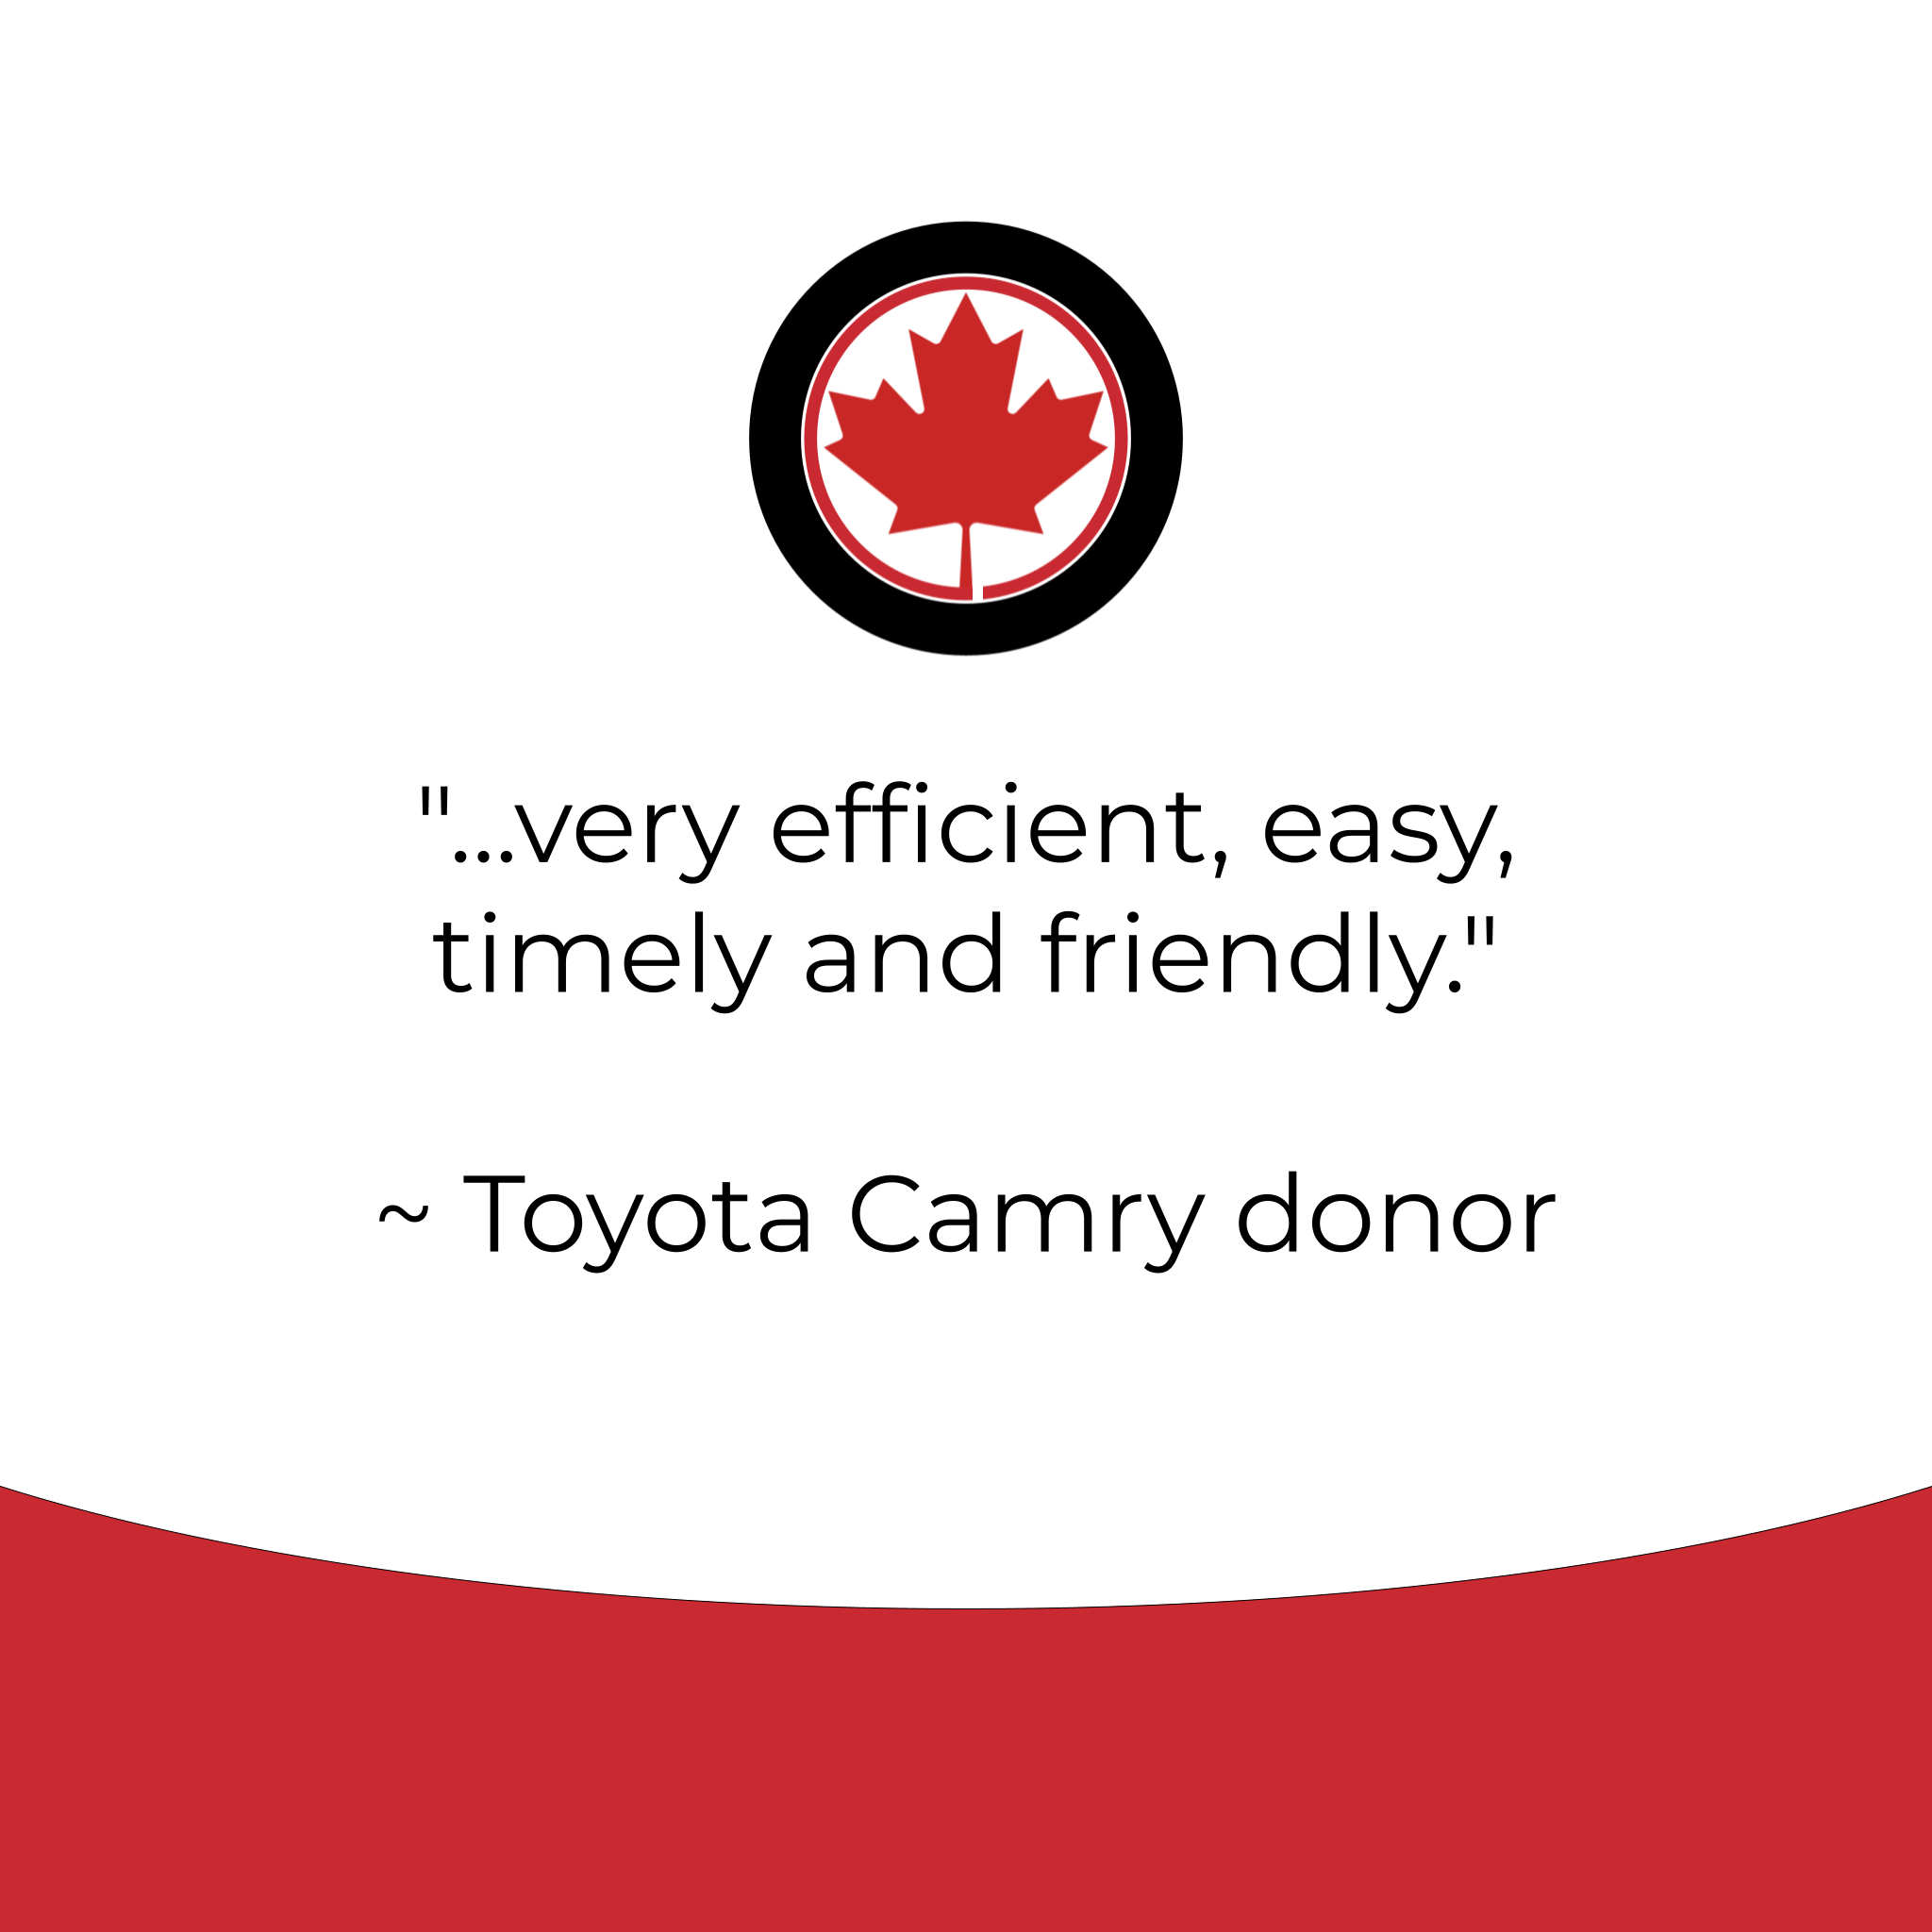 White square red band across bottom black tire with red maple leaf in center text reads Toyota donor thought experience was easy, timely, friendly